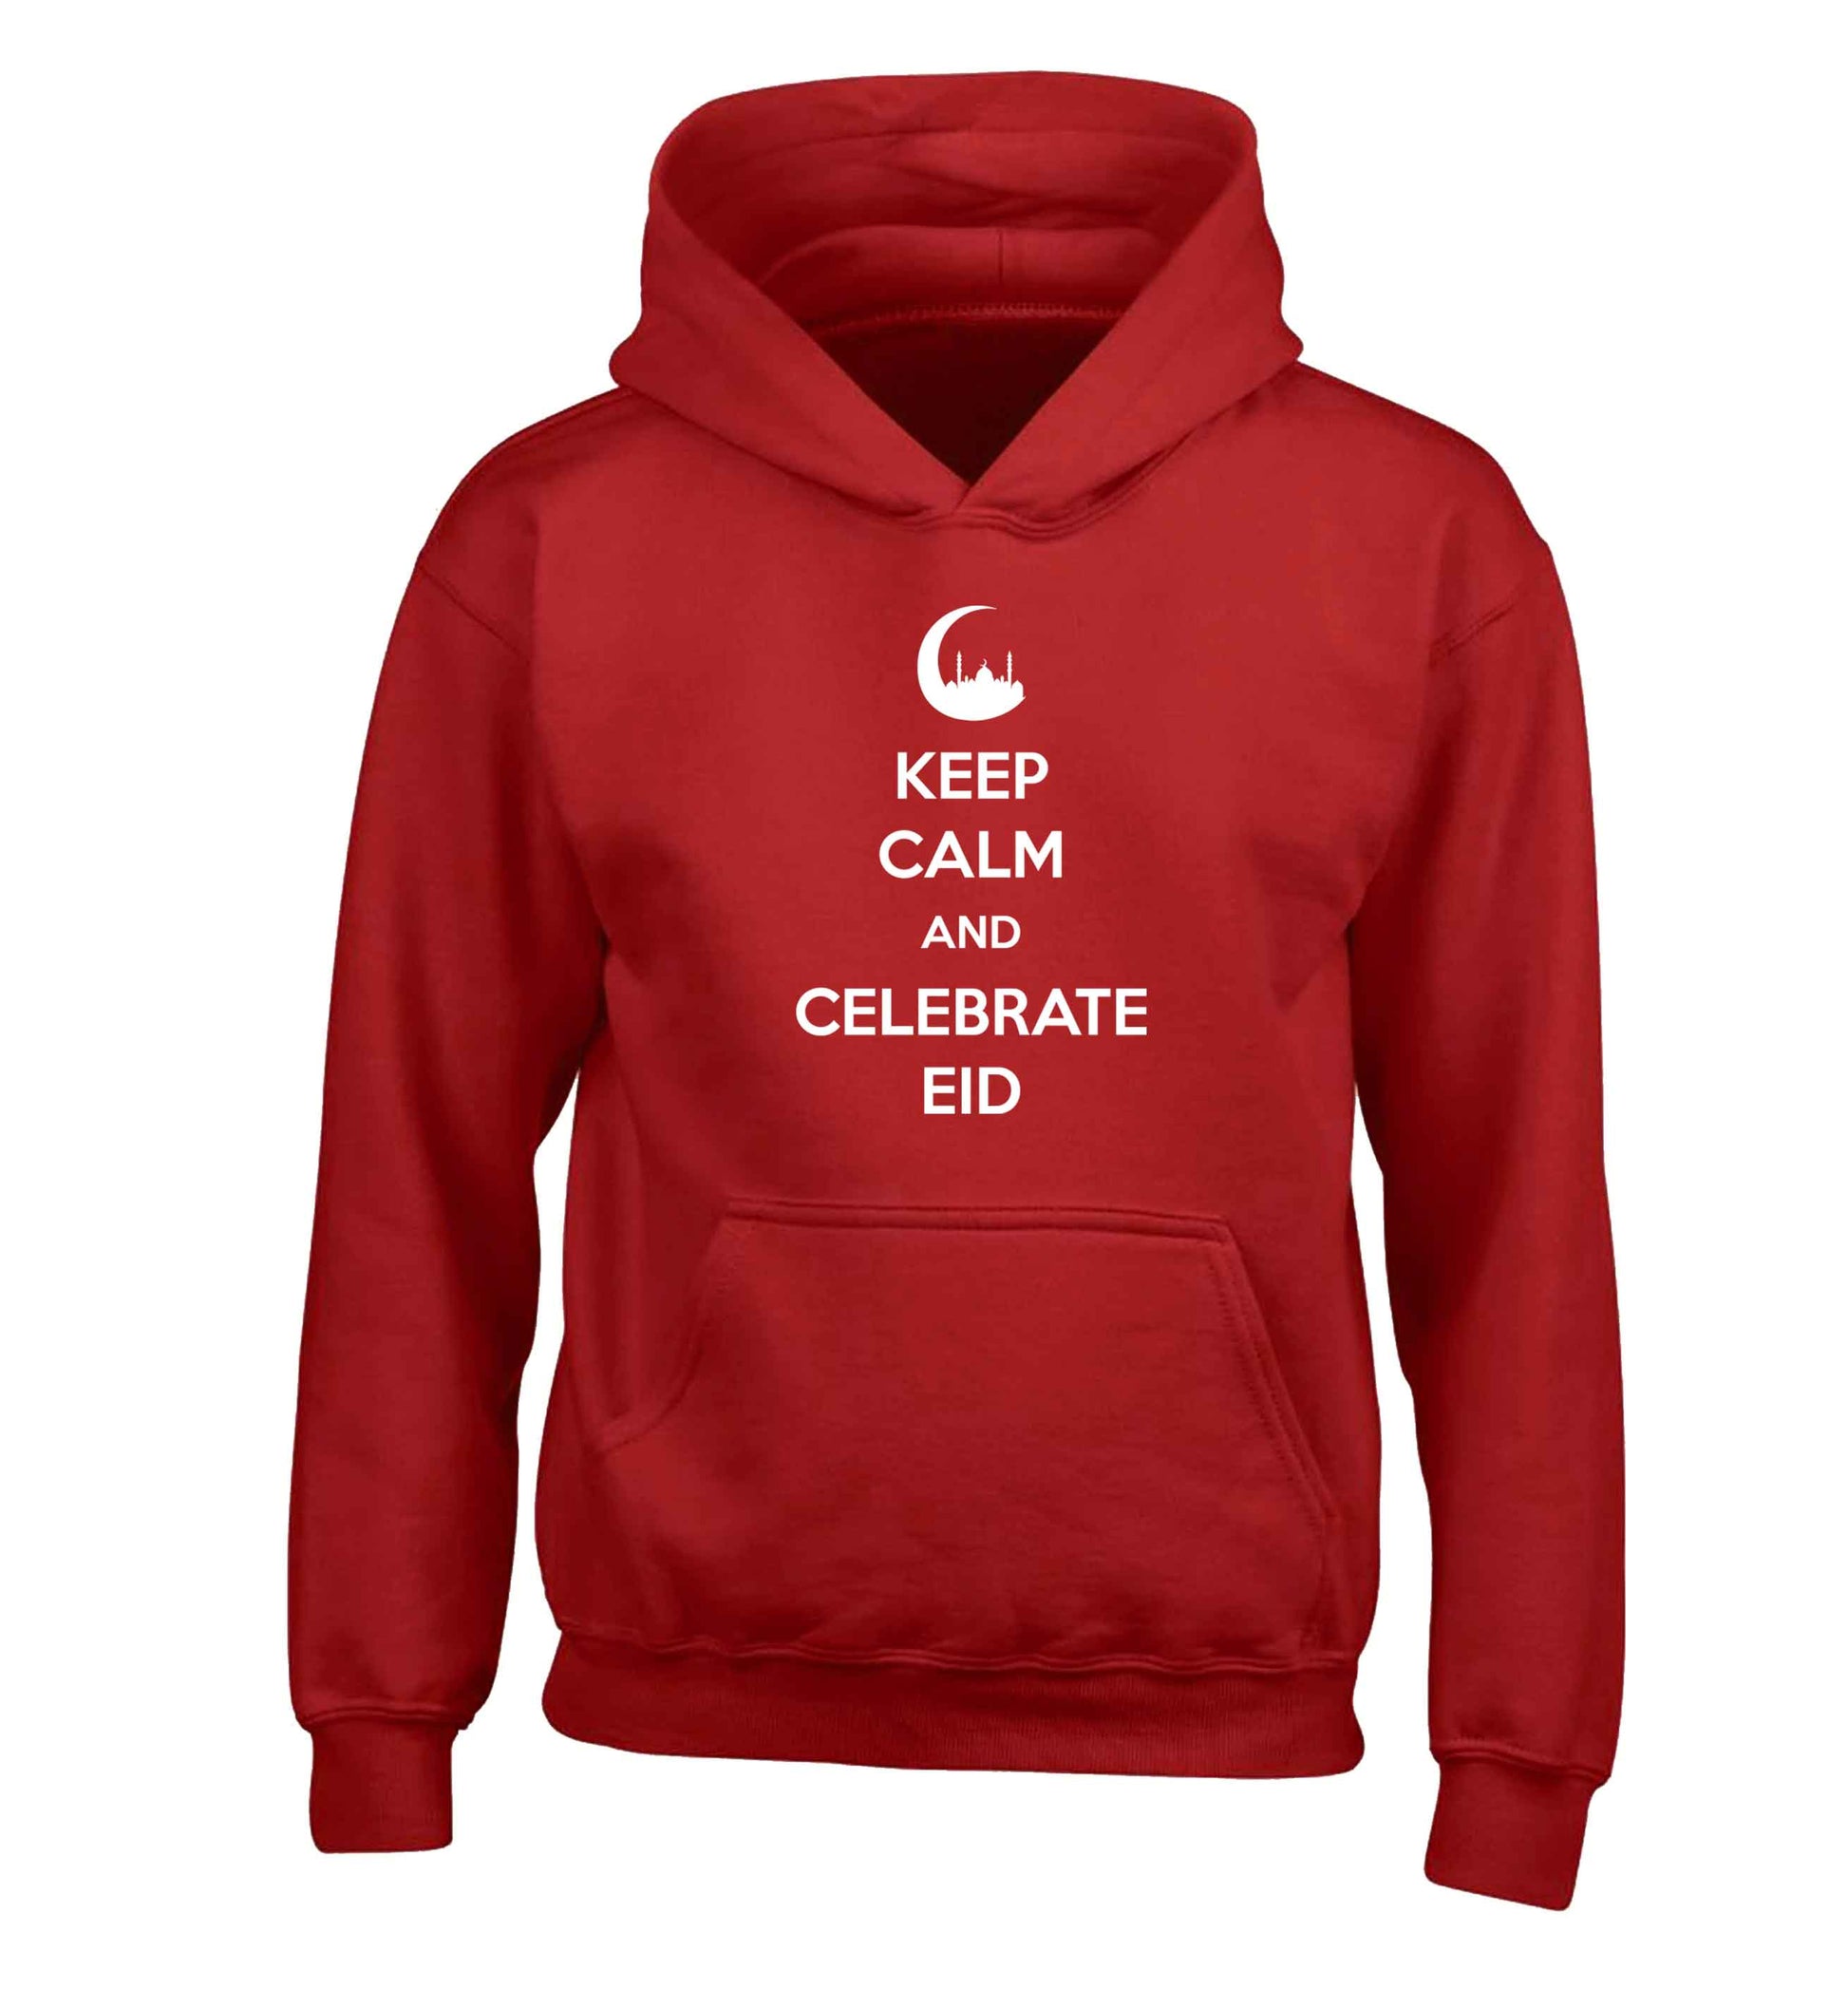 Keep calm and celebrate Eid children's red hoodie 12-13 Years